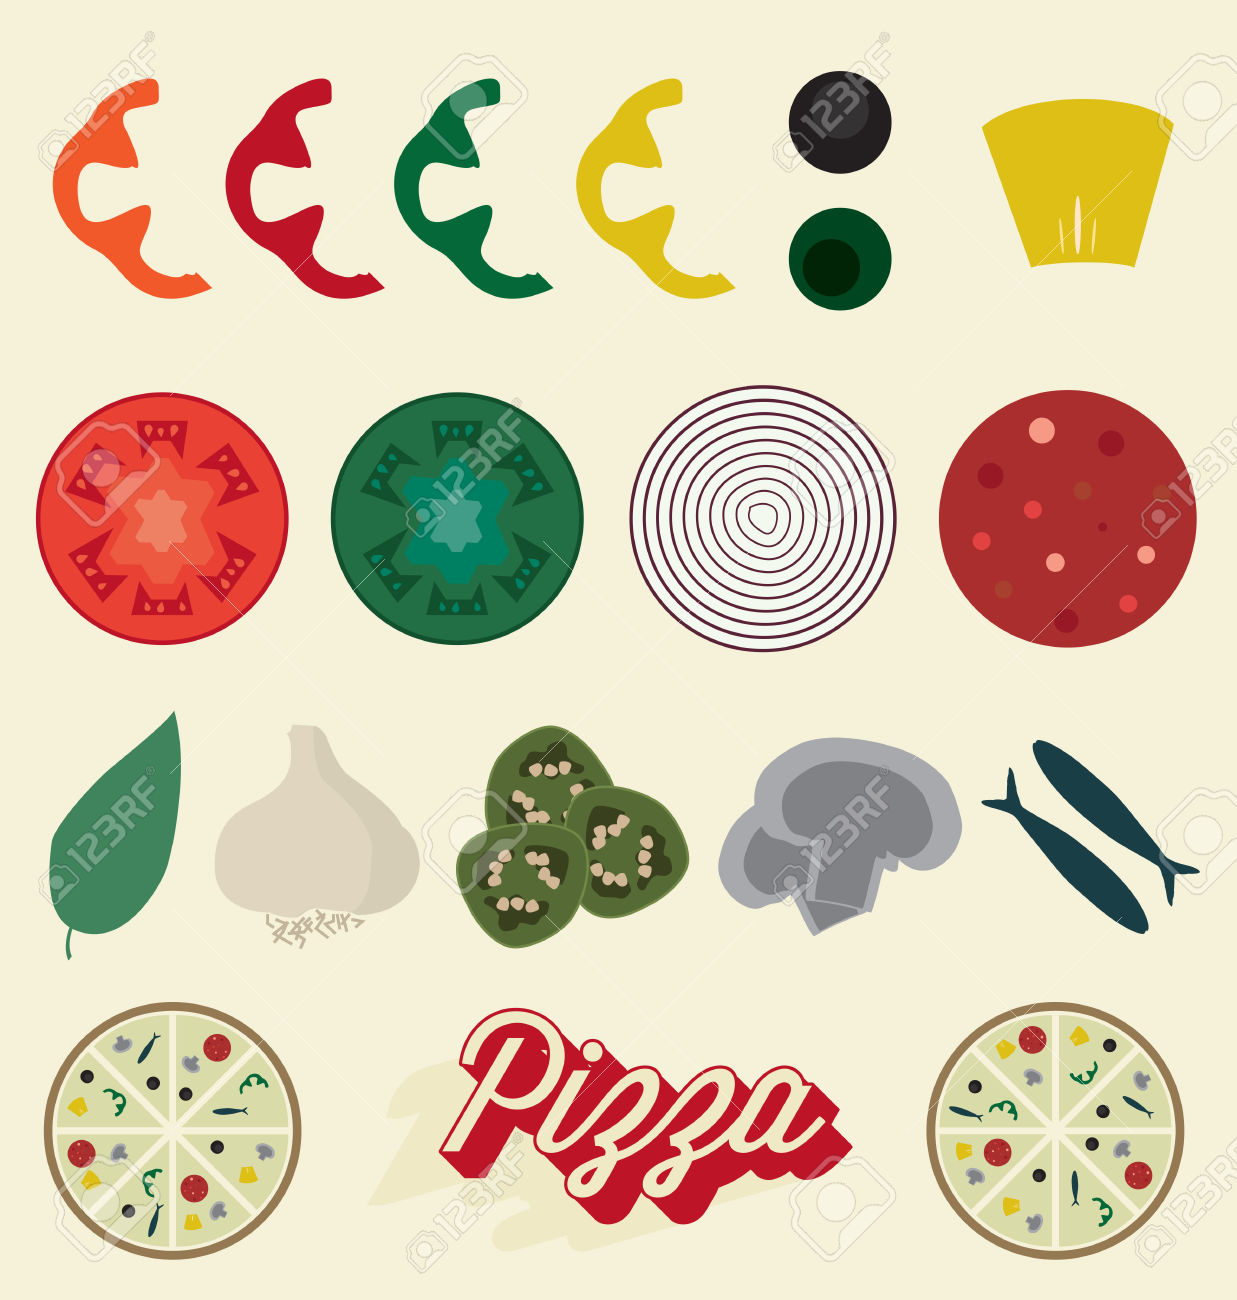 pizza topping: Pizza Toppings Collection Illustration